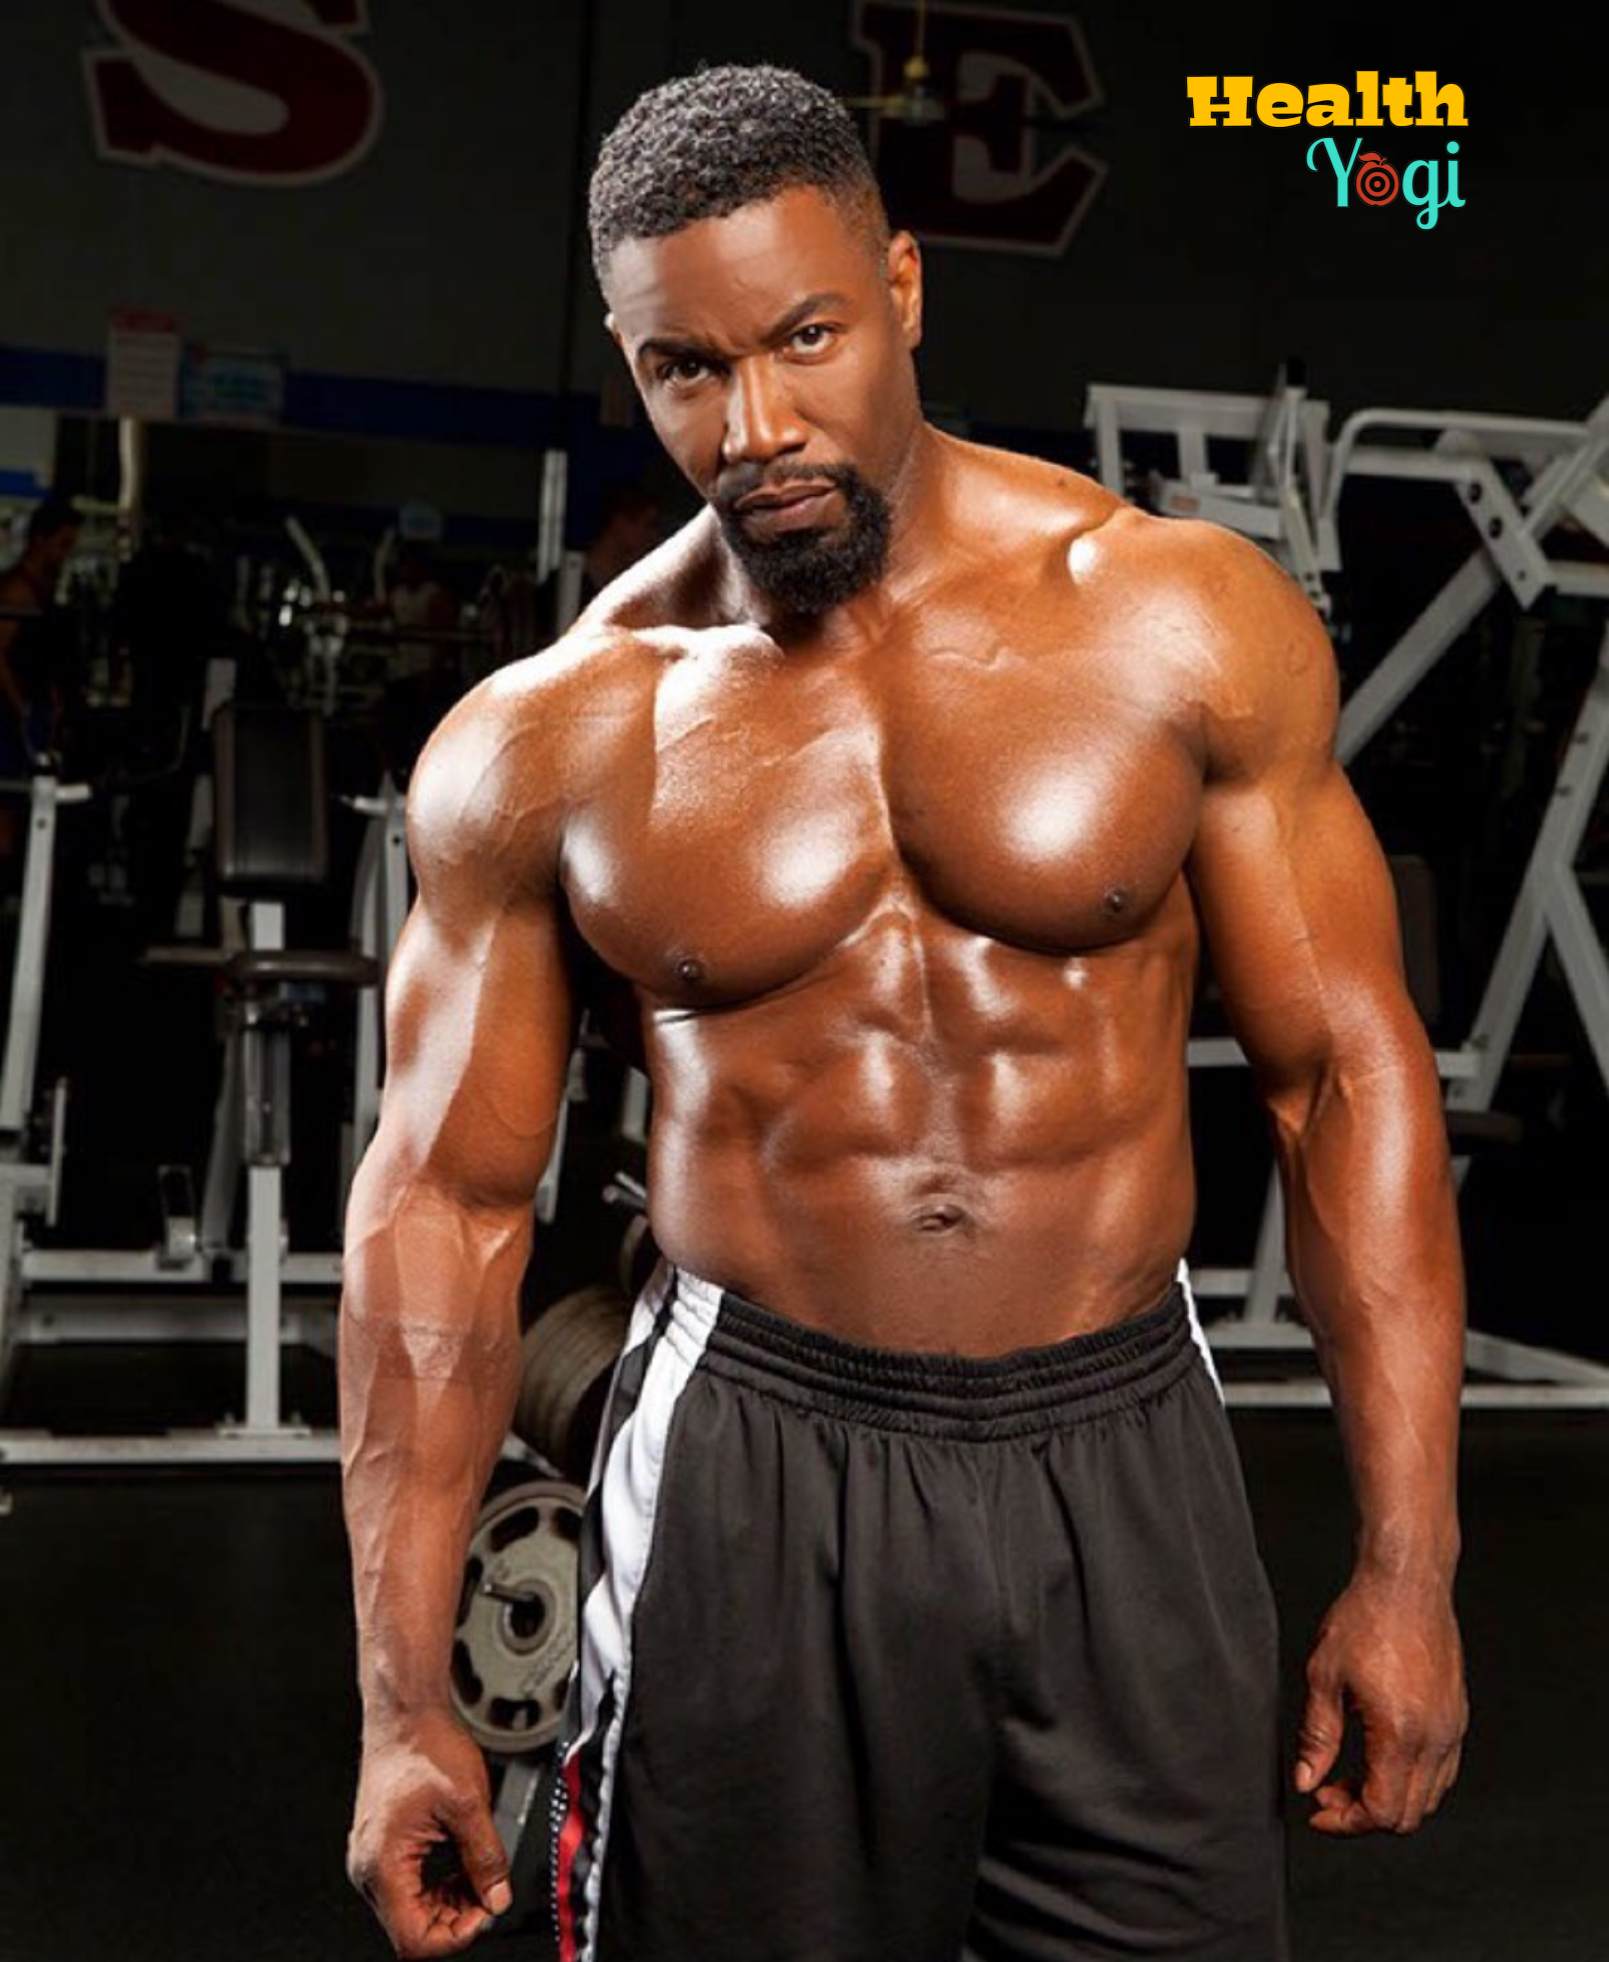 Simple Michael Jai White Workout Video for Weight Loss